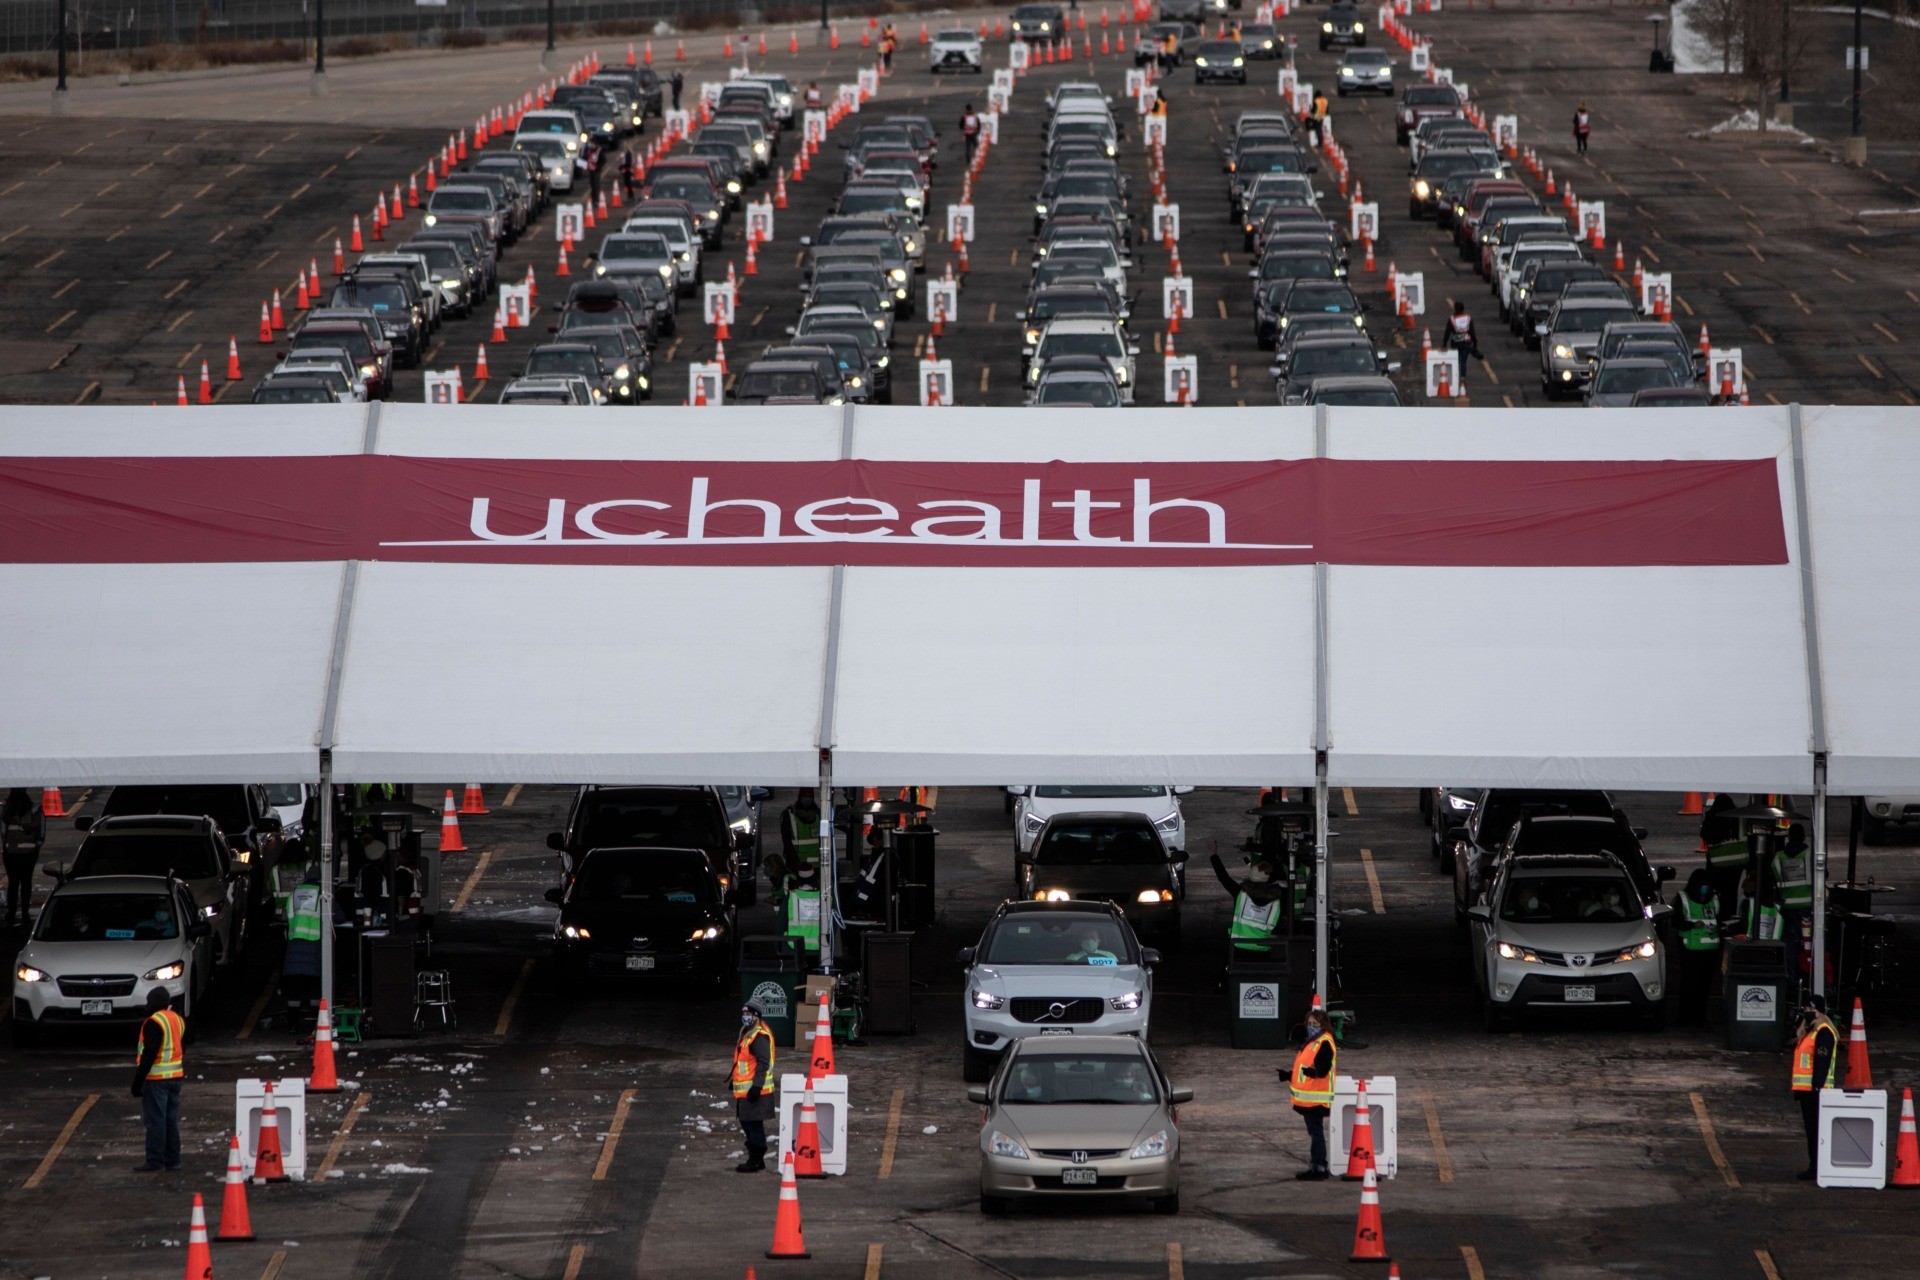 People arrive for Covid-19 vaccination at a drive through setup at Coors Field baseball stadium on January 30, 2021, in Denver, Colorado. - UCHealth, the organizer and Colorado's largest healthcare provider, has set the goal of vaccinating 10,000 people over the weekend. (Photo by Chet Strange / AFP) (Photo by CHET STRANGE/AFP via Getty Images)